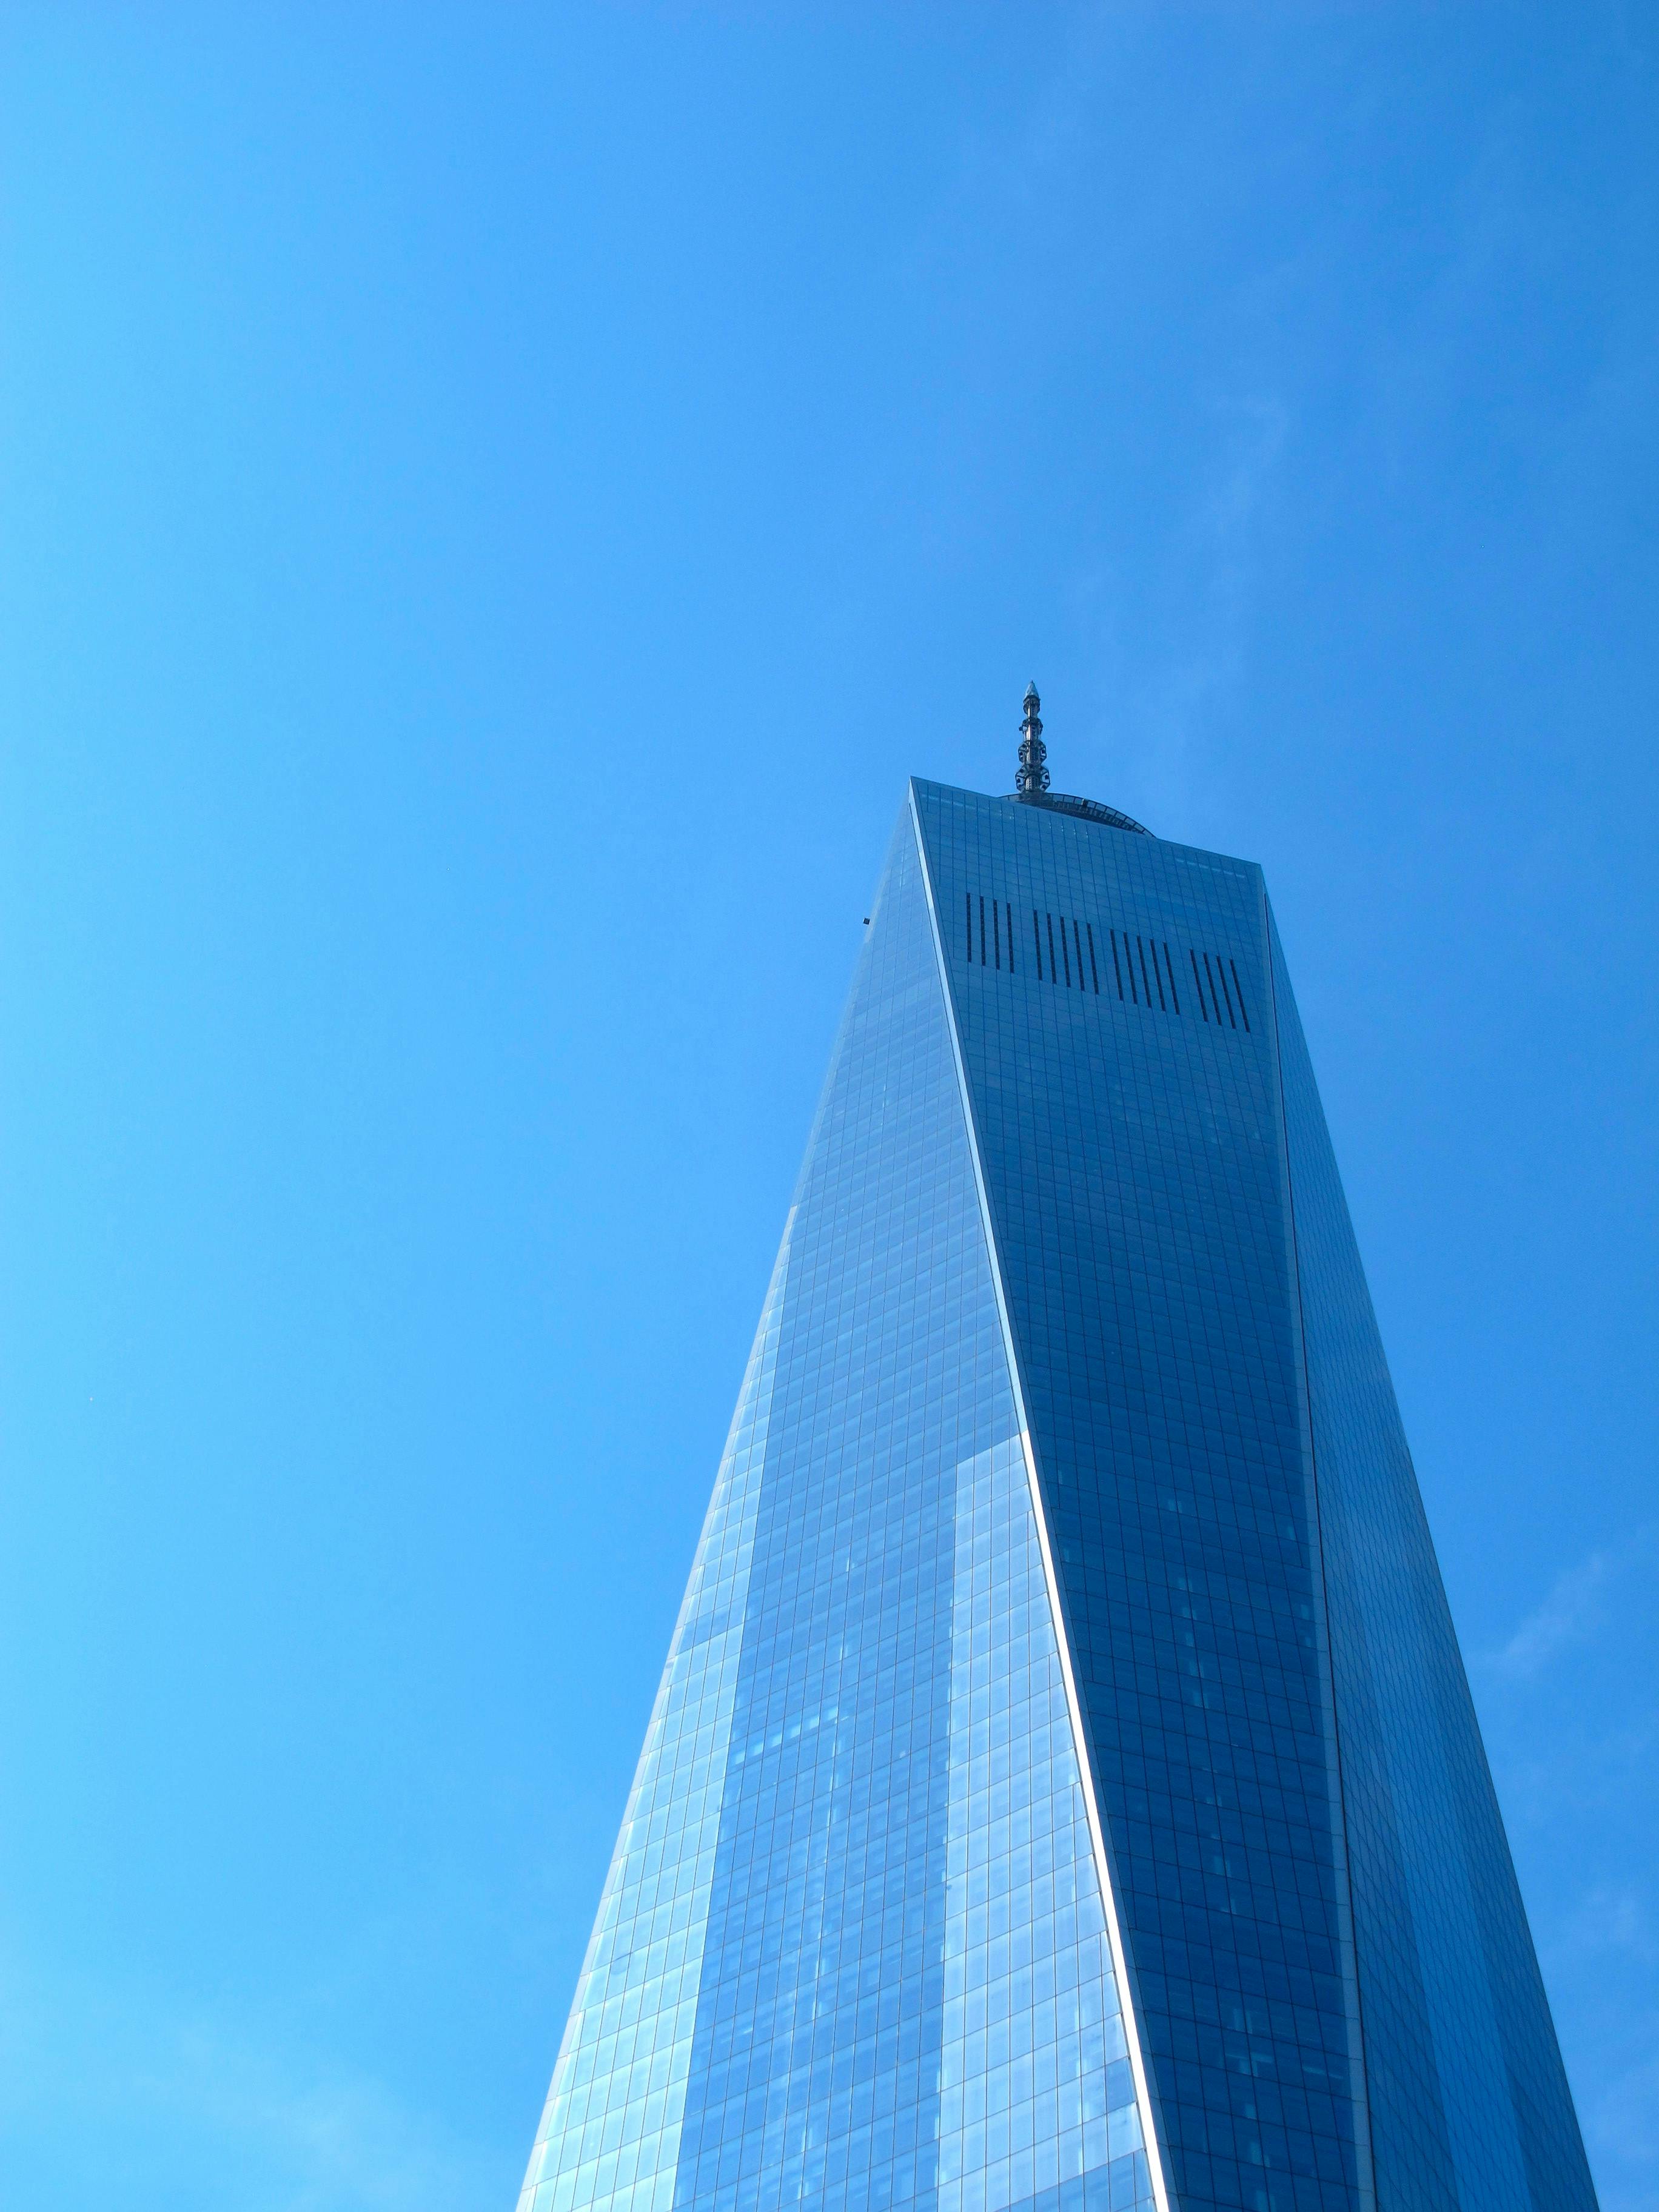 Free Stock Photo Of Freedom Tower New York Ceity Office Building Images, Photos, Reviews